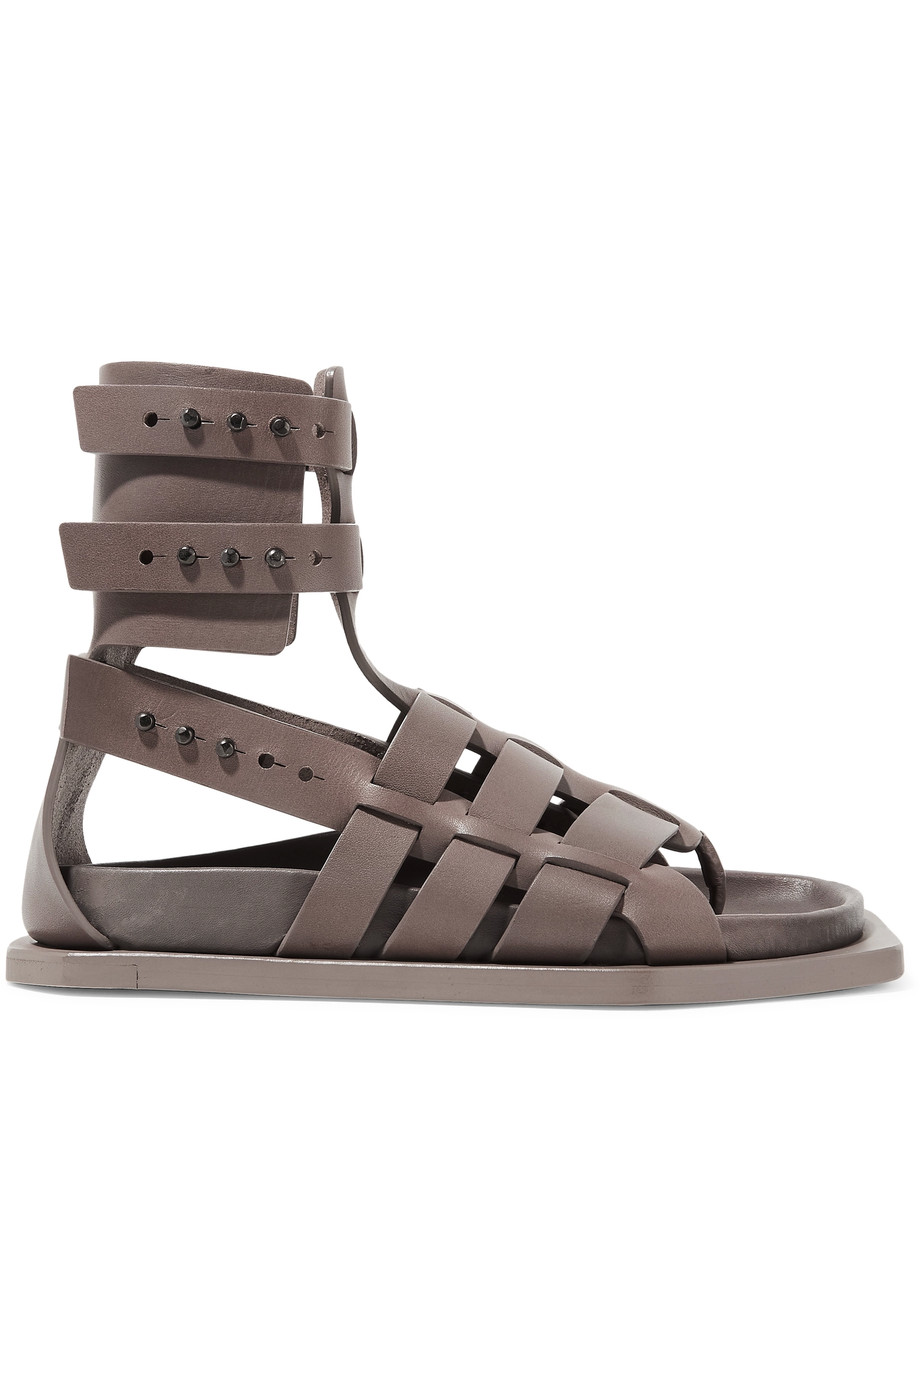 Rick Owens Woven Leather Sandals | ModeSens